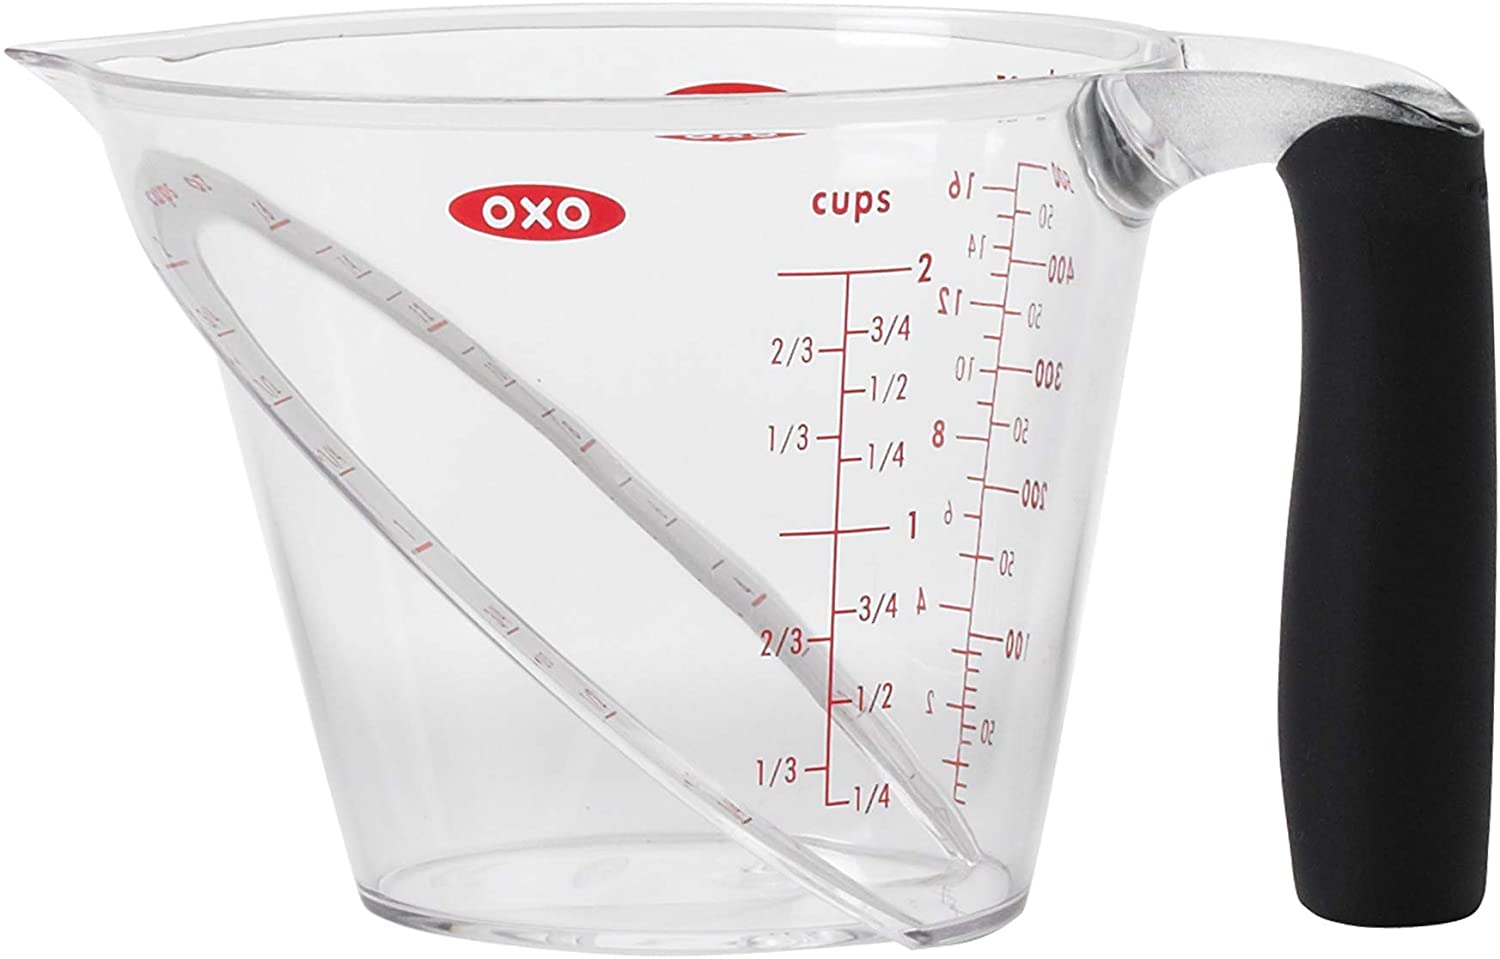 measuring cup with pouring spout, black handle, and red markings.